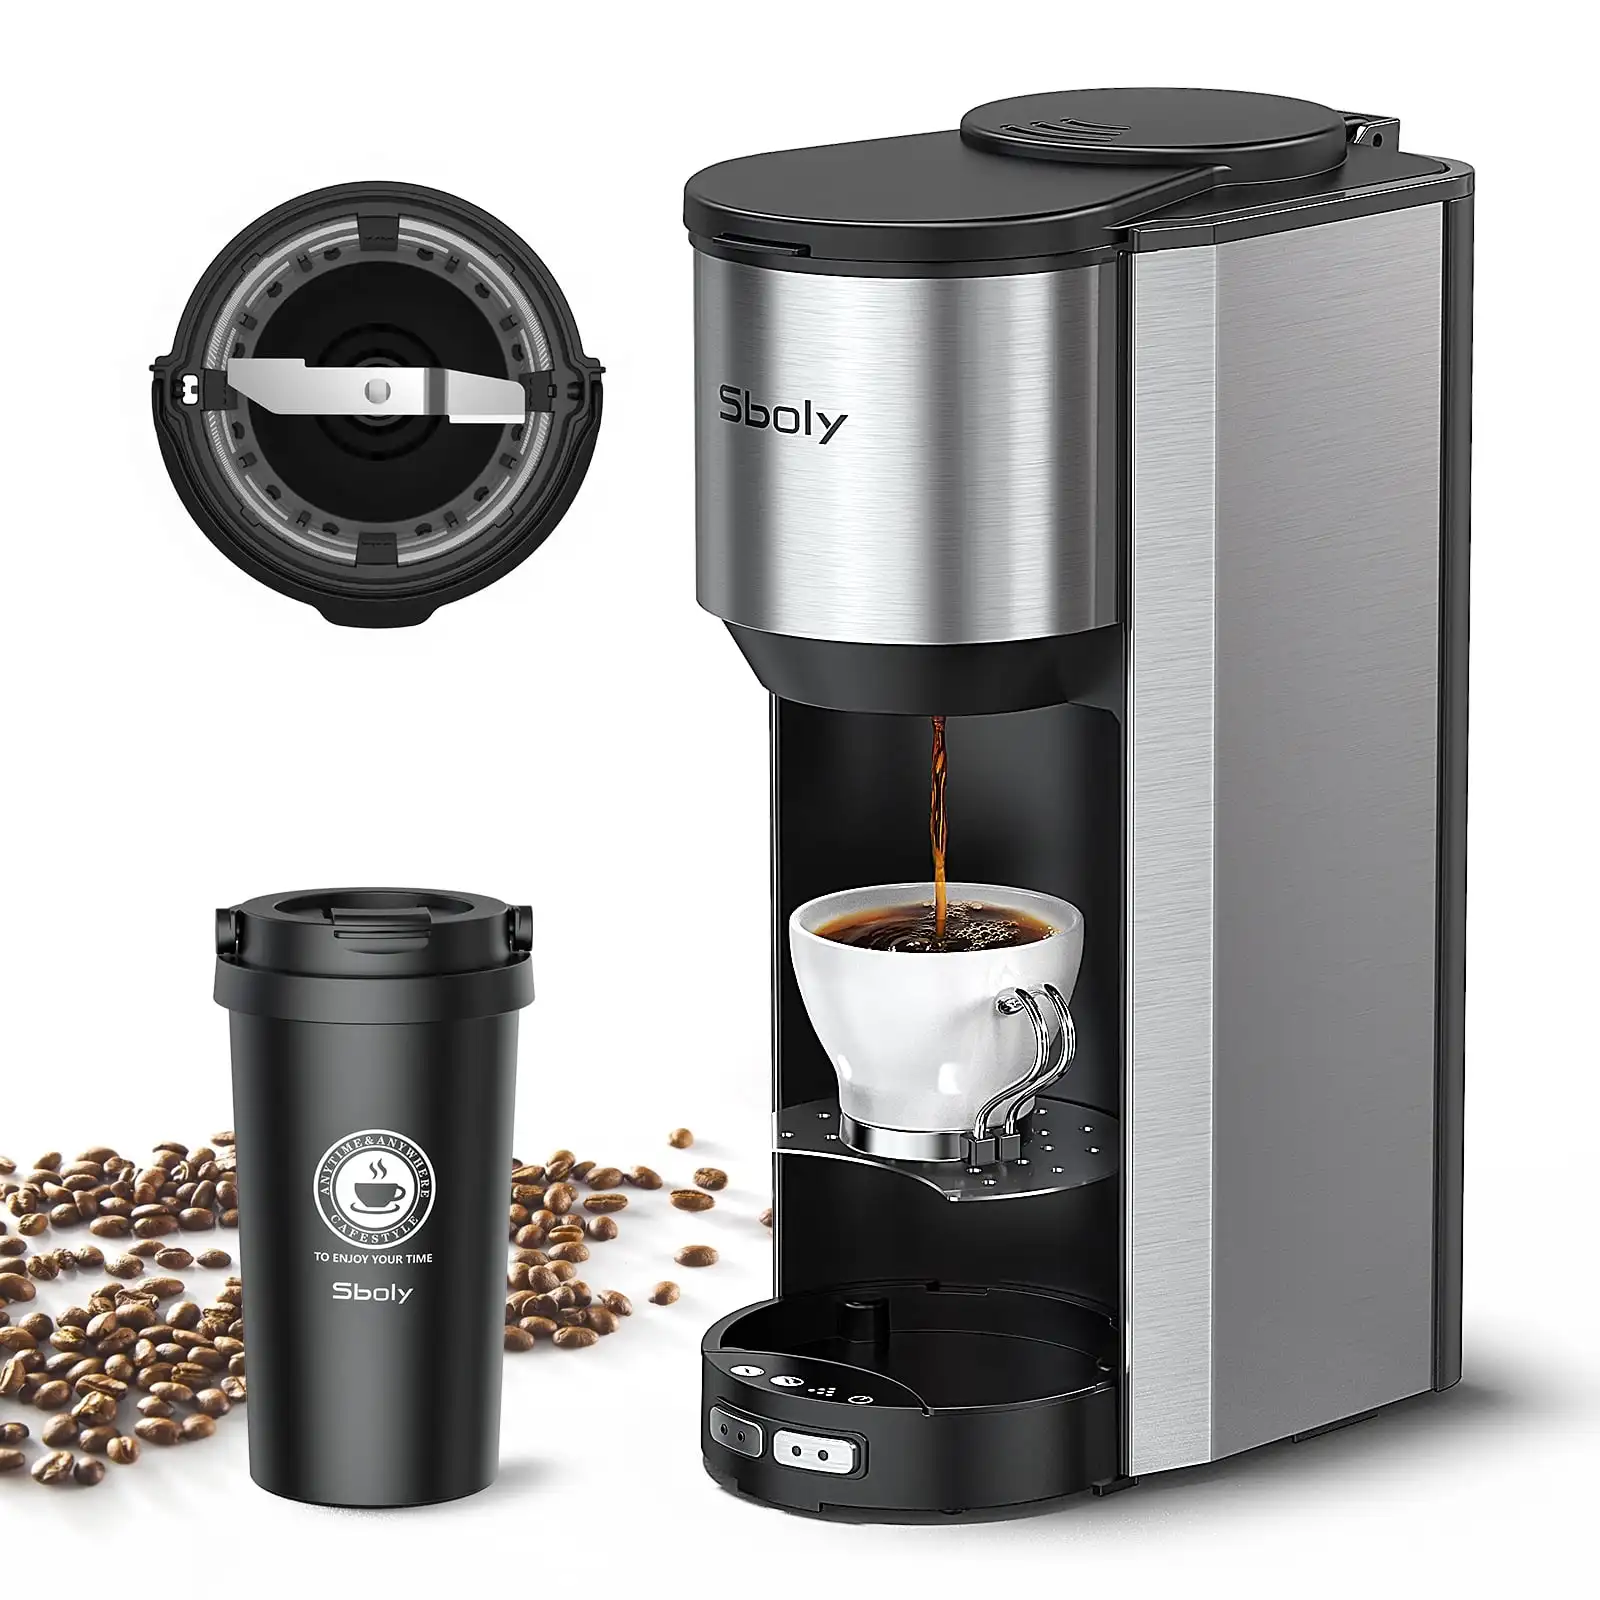 

Coffee & Espresso Machine Single-Serve Coffeemaker Grinding and brewing in one With Mug, Black